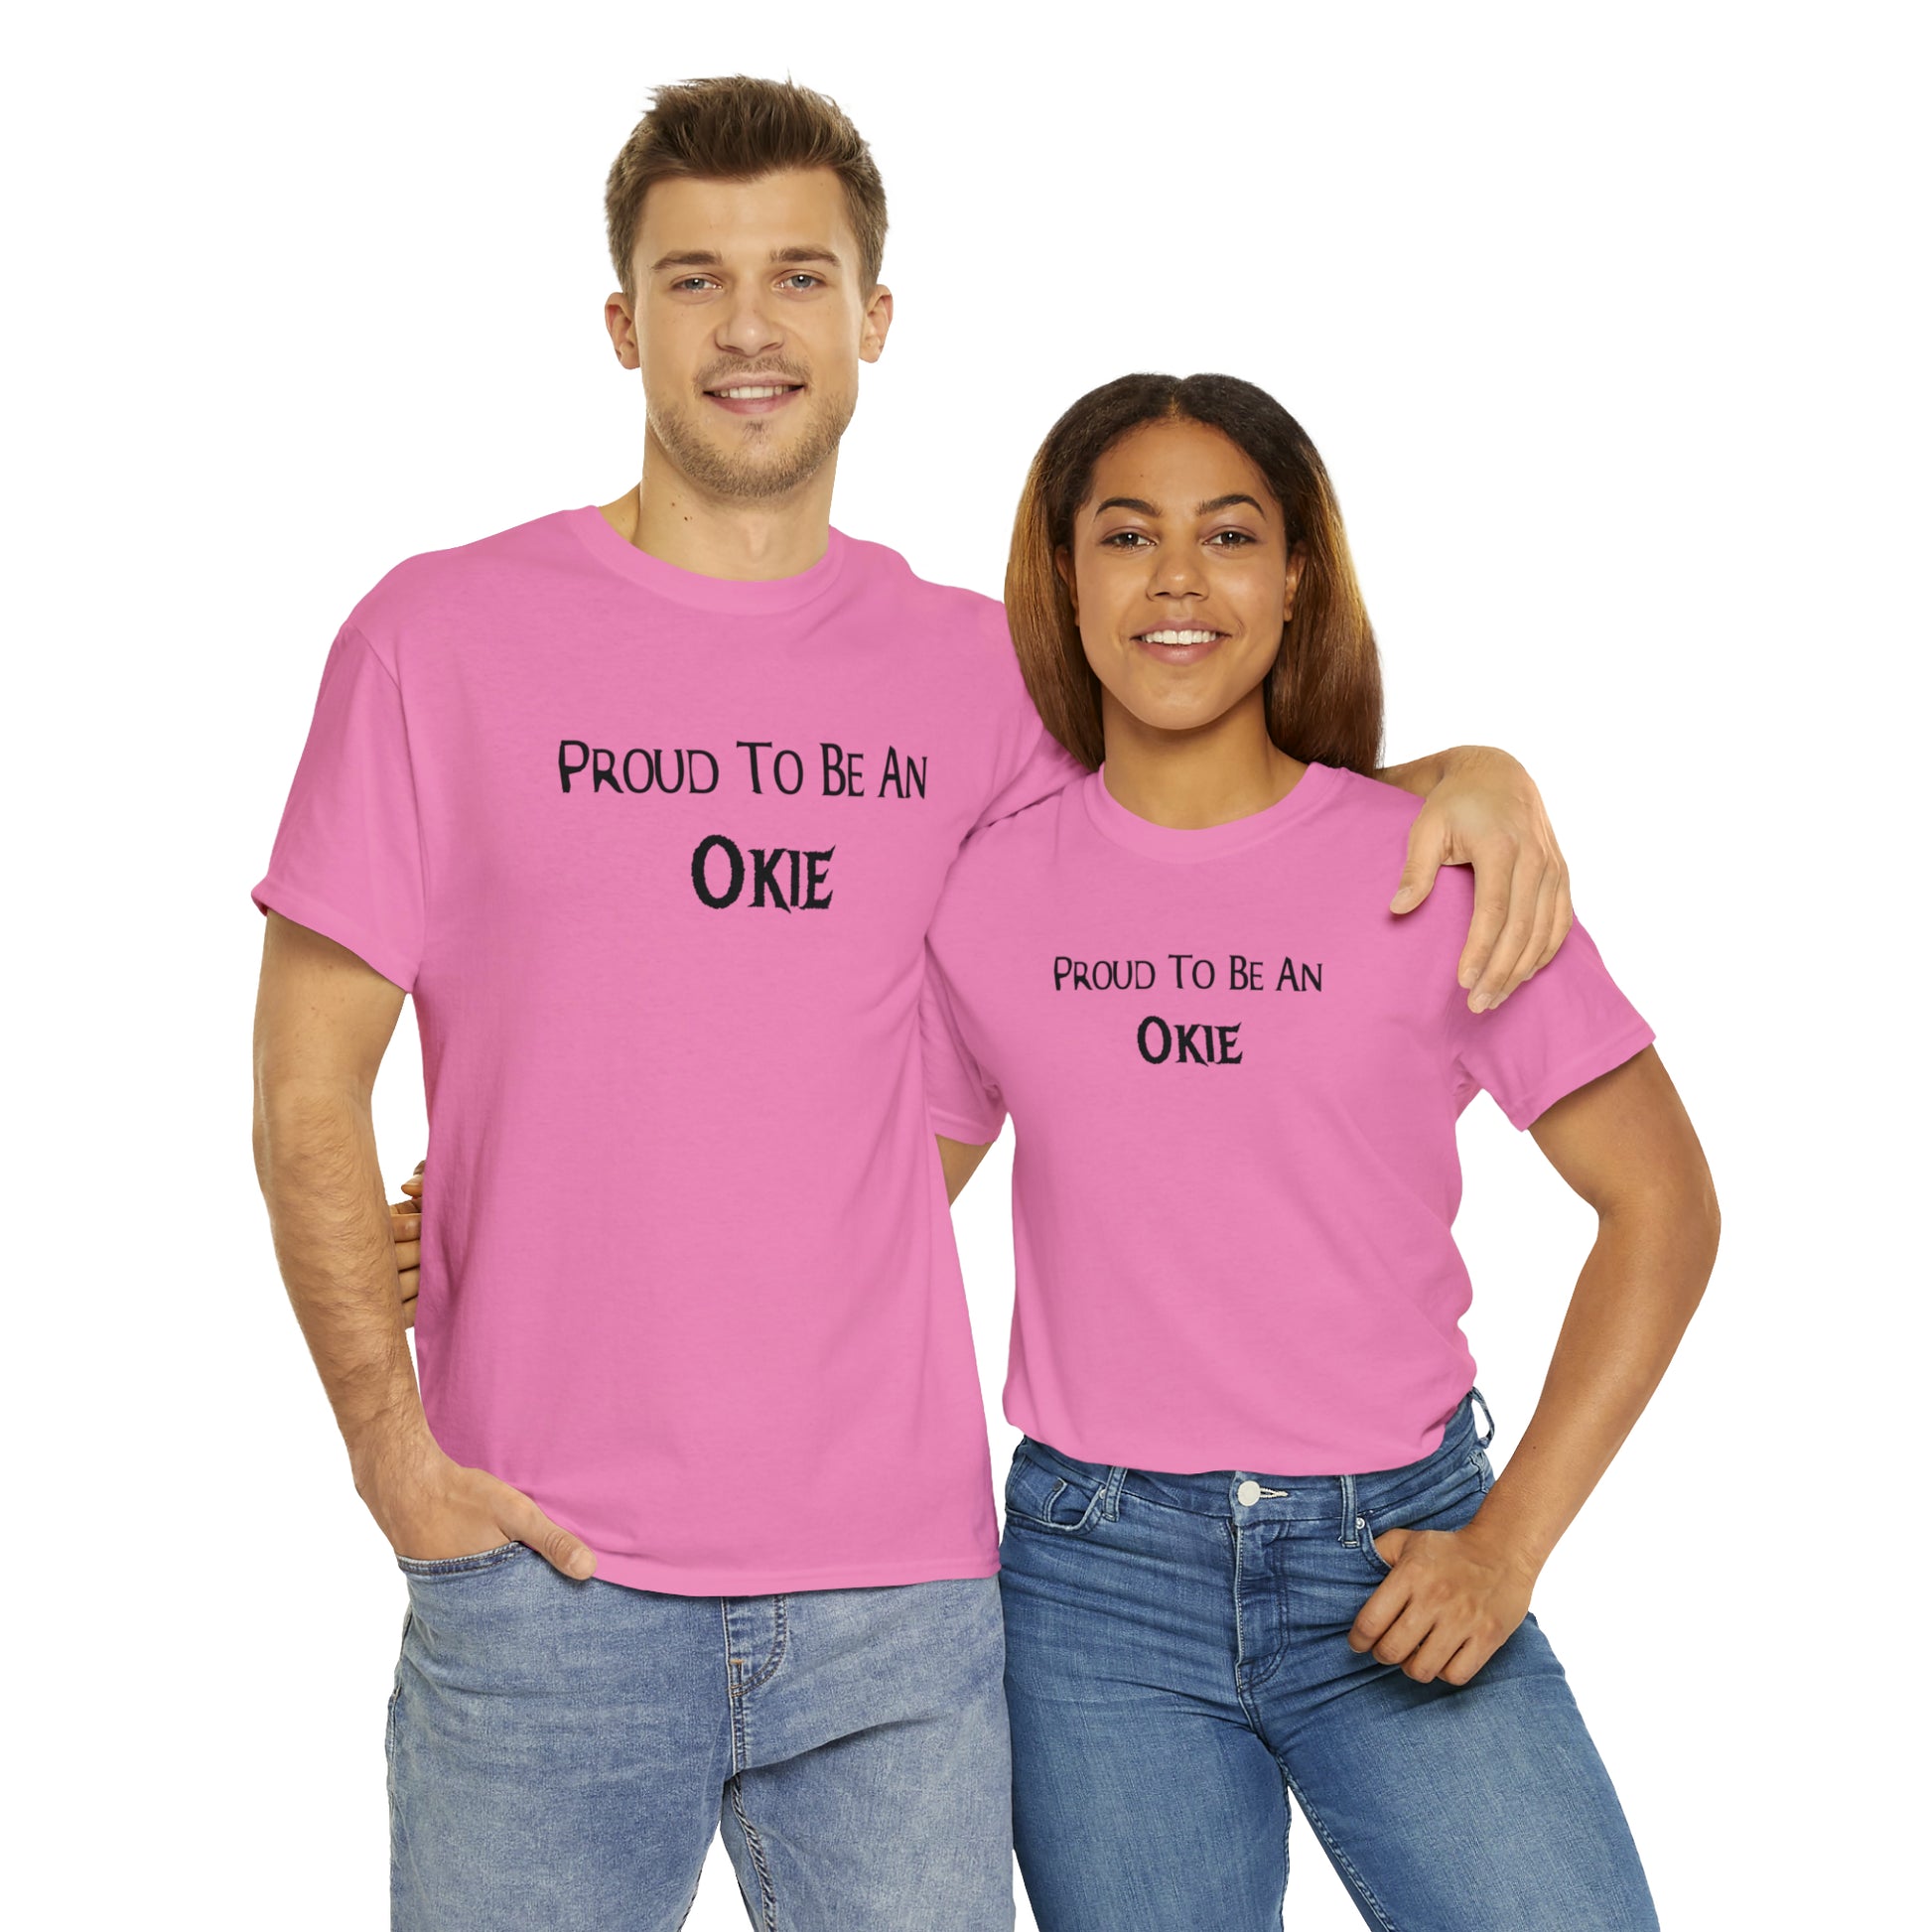 "Proud To Be An Okie" T-shirt - Weave Got Gifts - Unique Gifts You Won’t Find Anywhere Else!